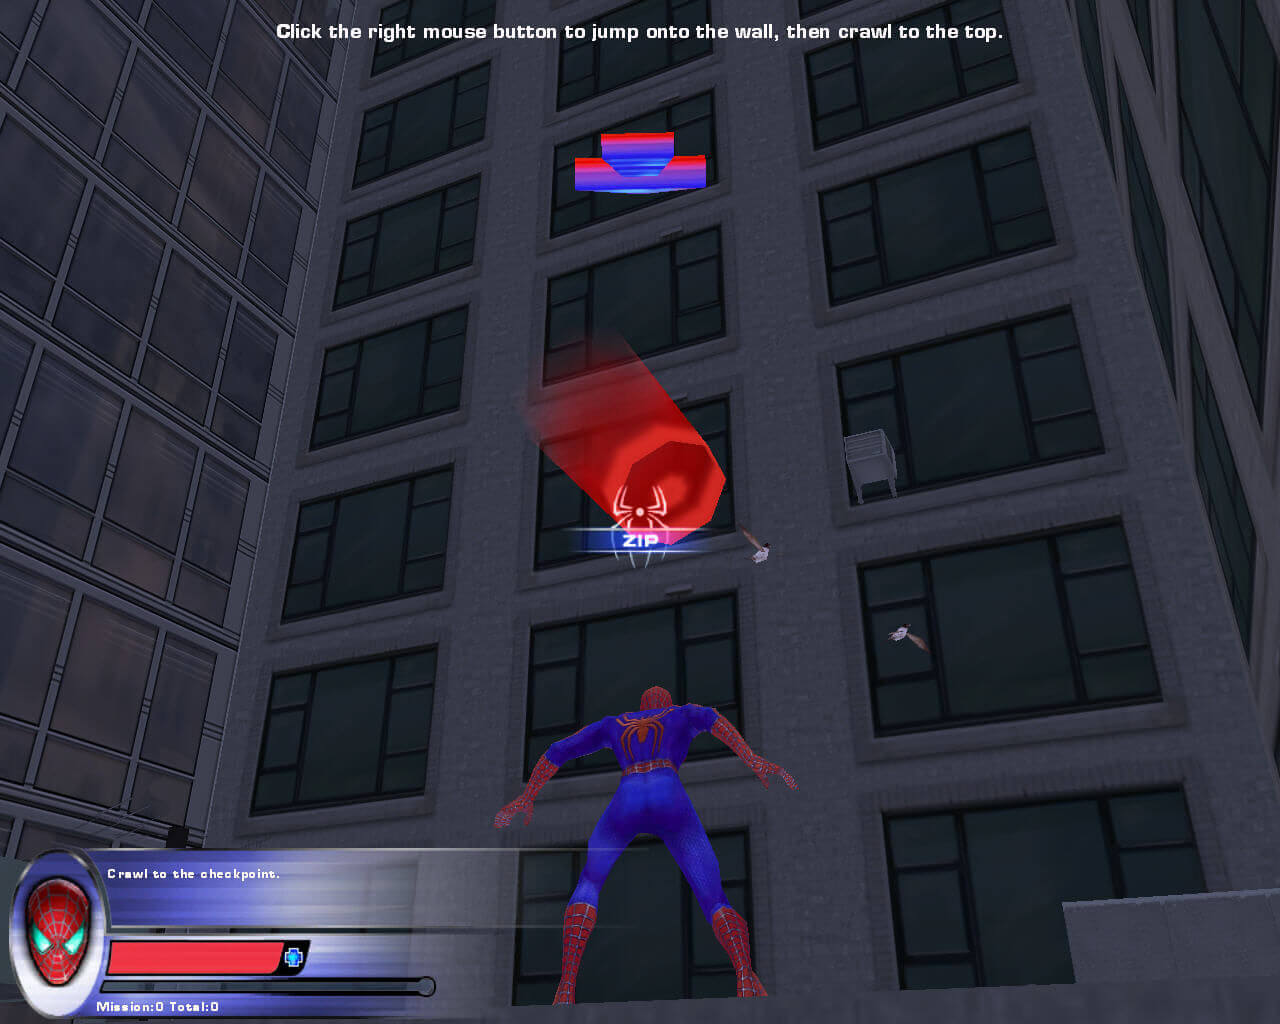 Spiderman 2 The Game PC CD ROM Activision 2004 Tested Works